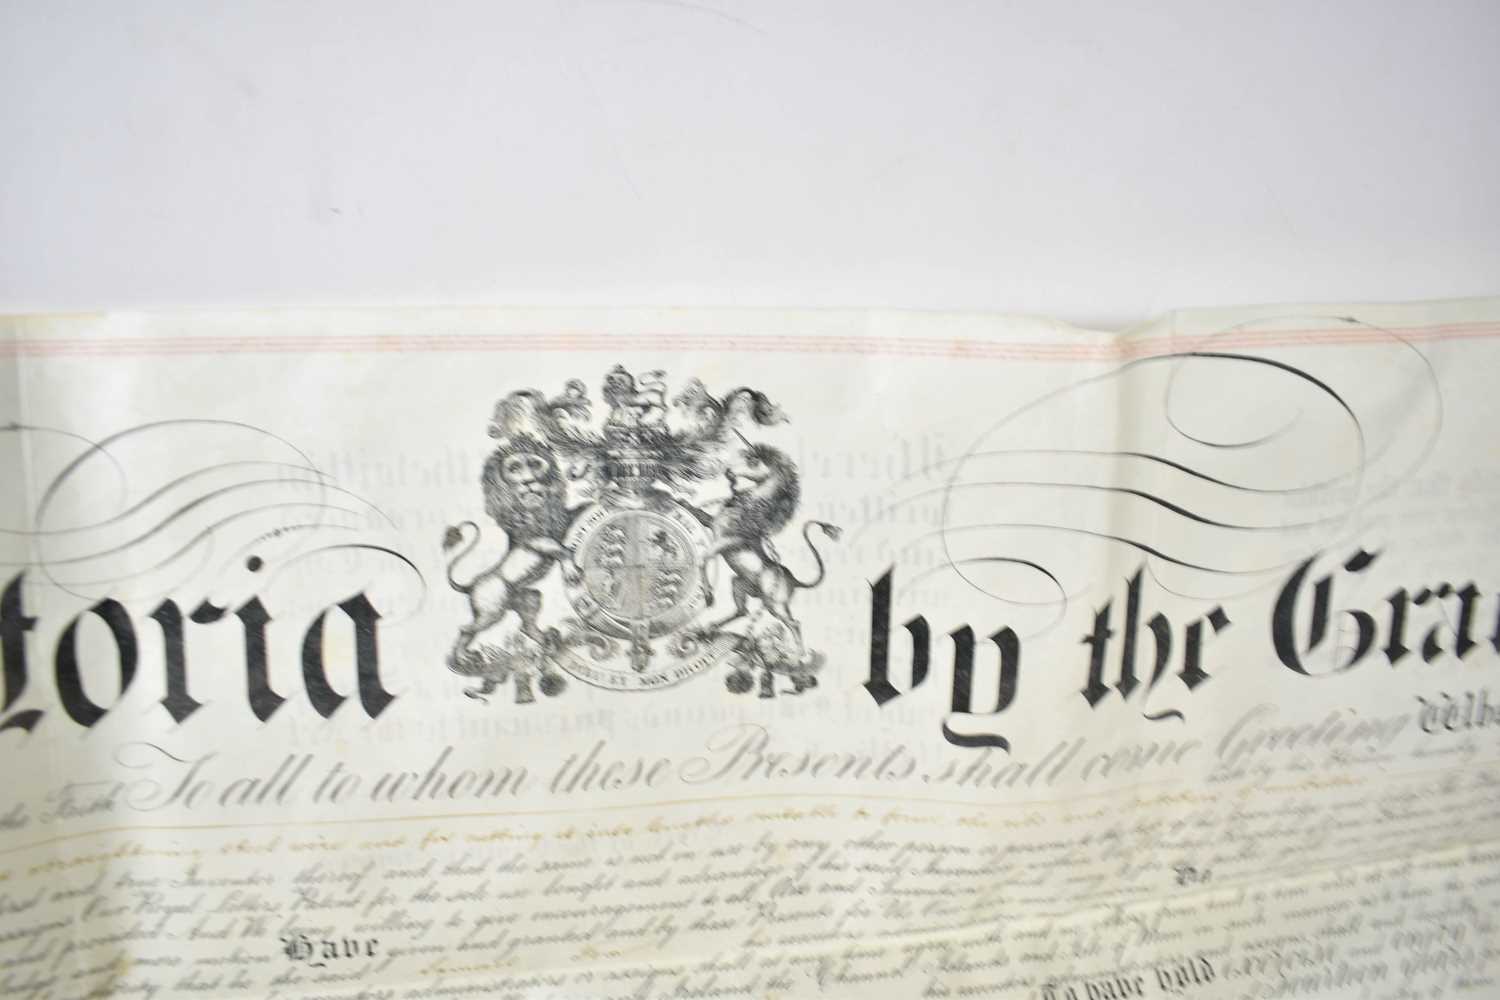 A Royal Warrant of Patent, hand written on vellum and granted to Samuel Fox of The Stocksbridge - Image 6 of 8